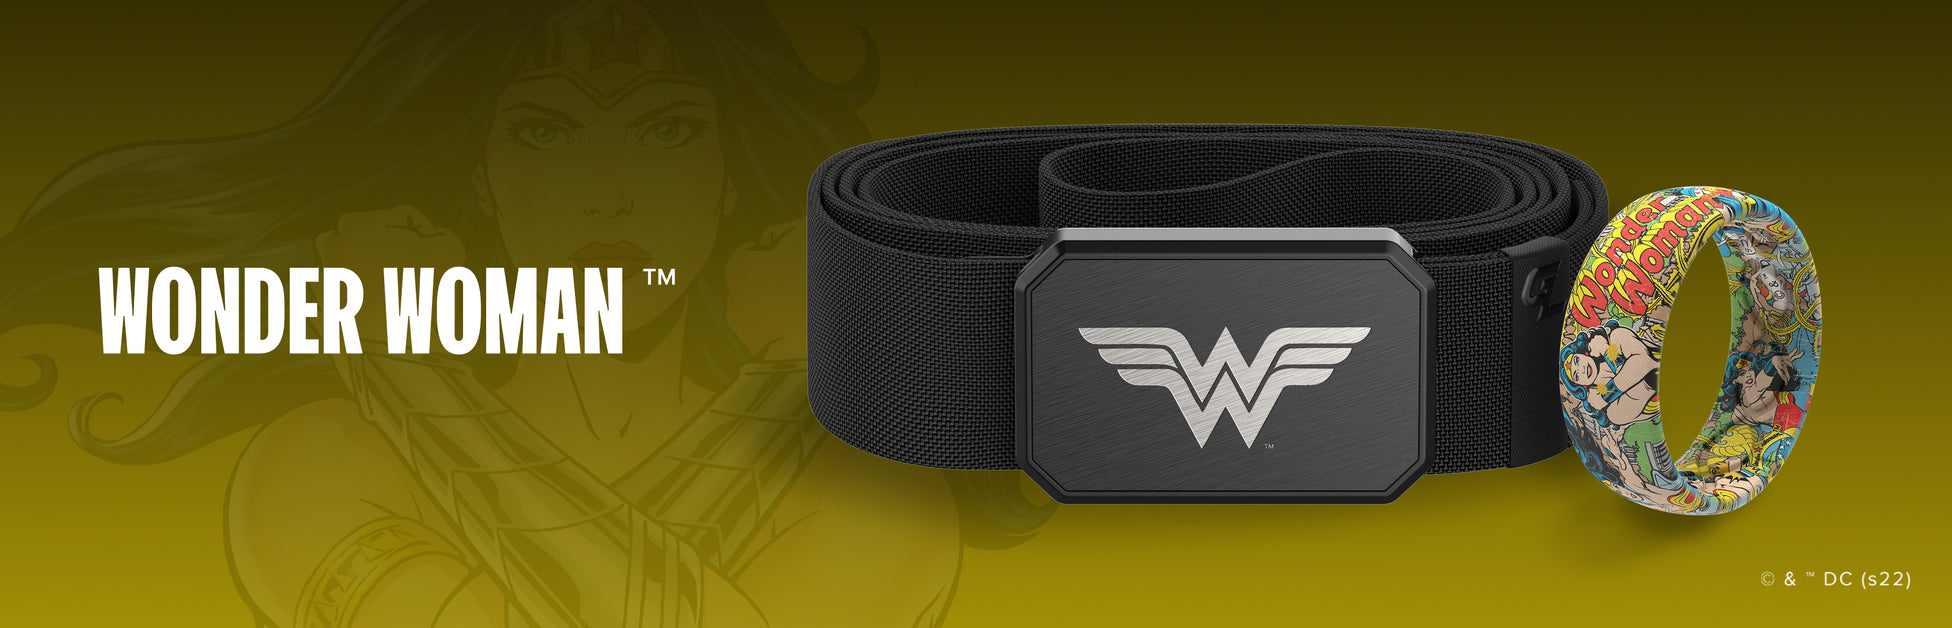 Wonder Woman Belts and Rings